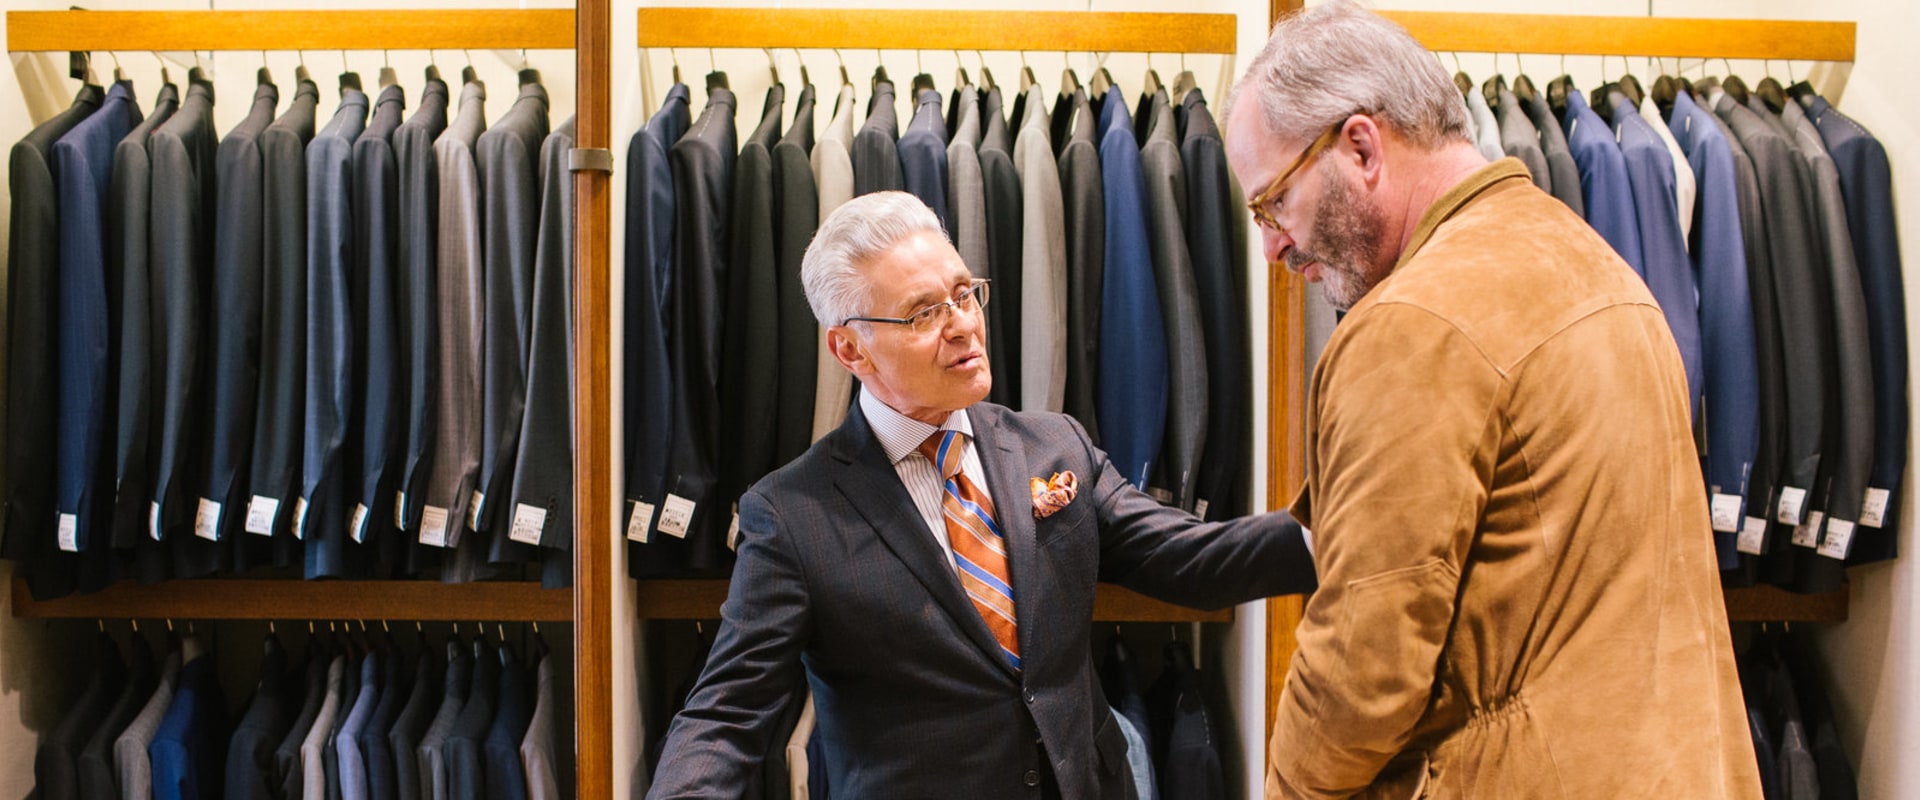 The Best Boutique Stores for Formal Wear in Philadelphia, PA